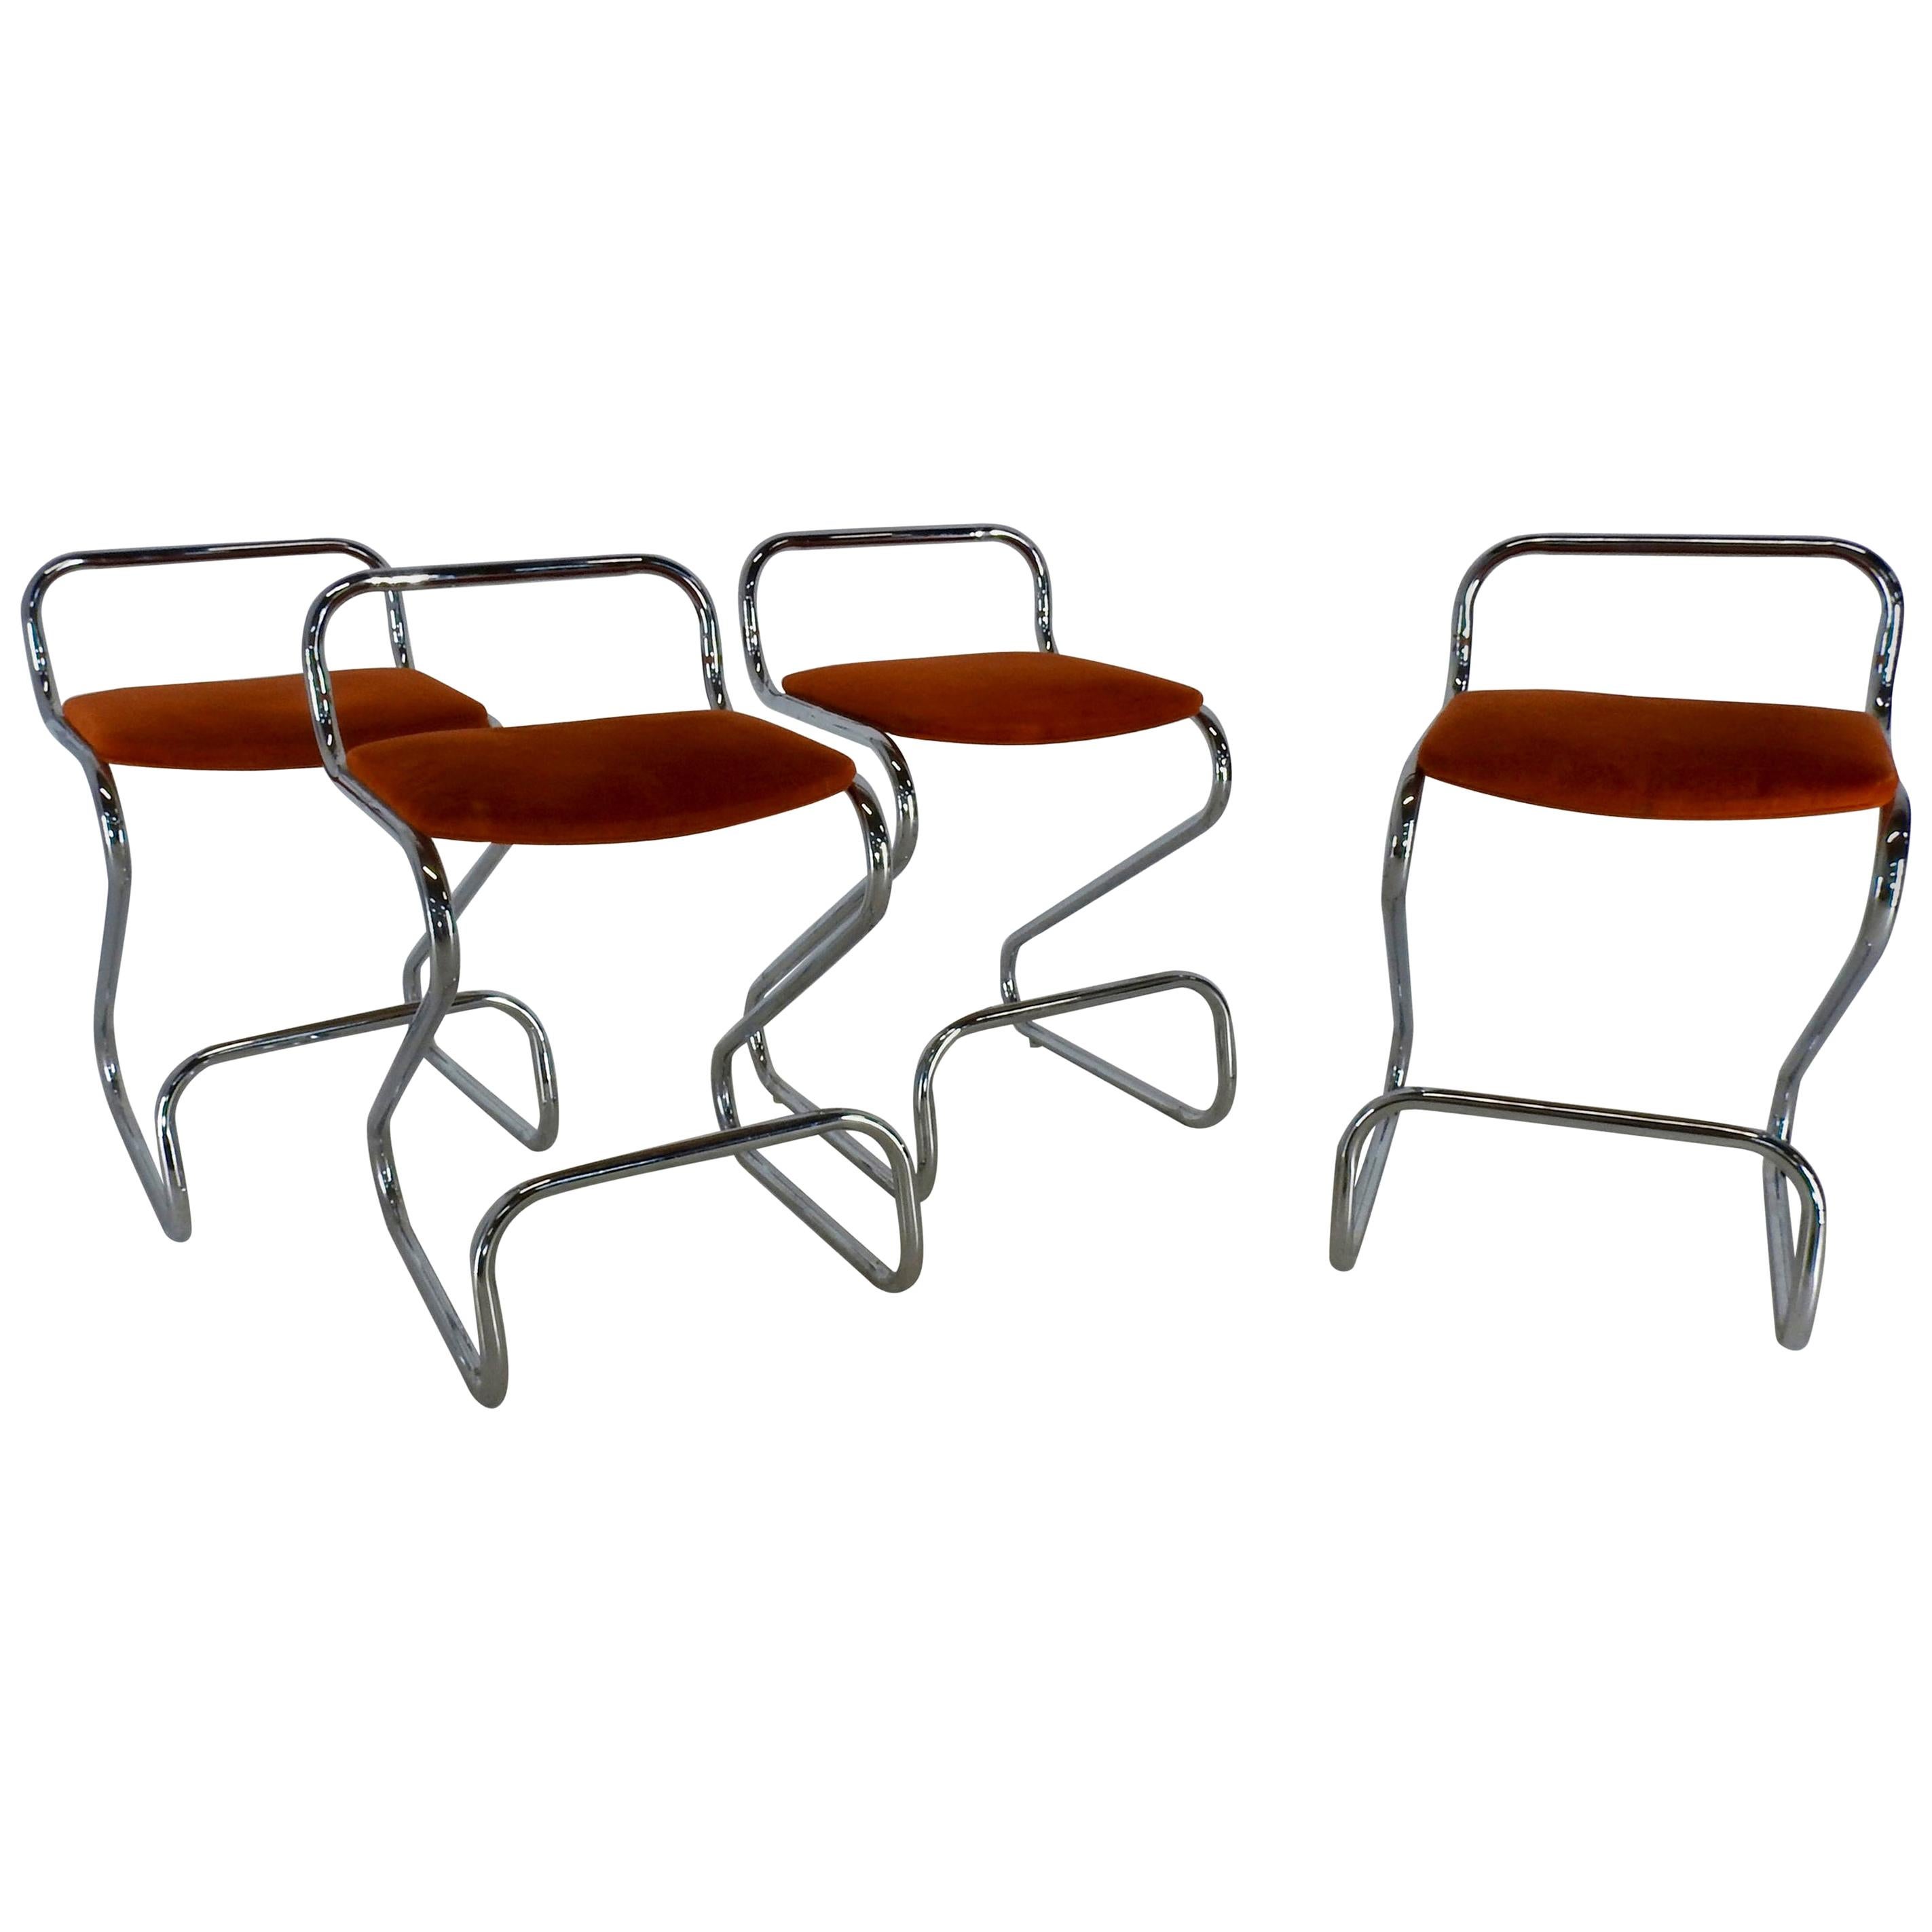 Daystrom Furniture Co. Chromium and Fabric Stools For Sale